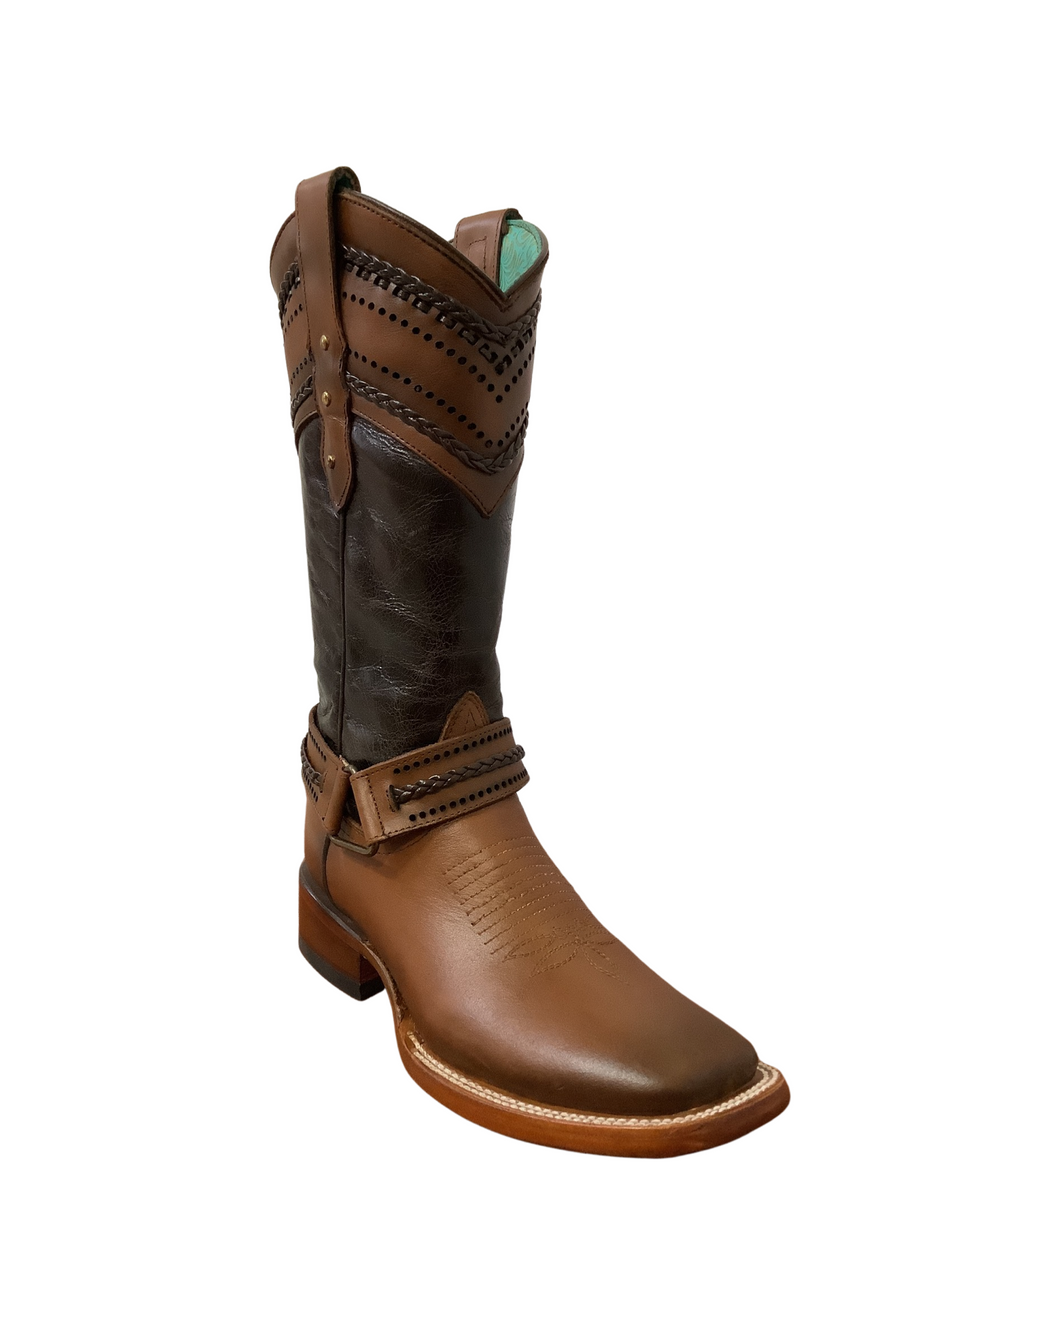 Quincy Boots Brown Cow Leather Wide Square Toe Boot